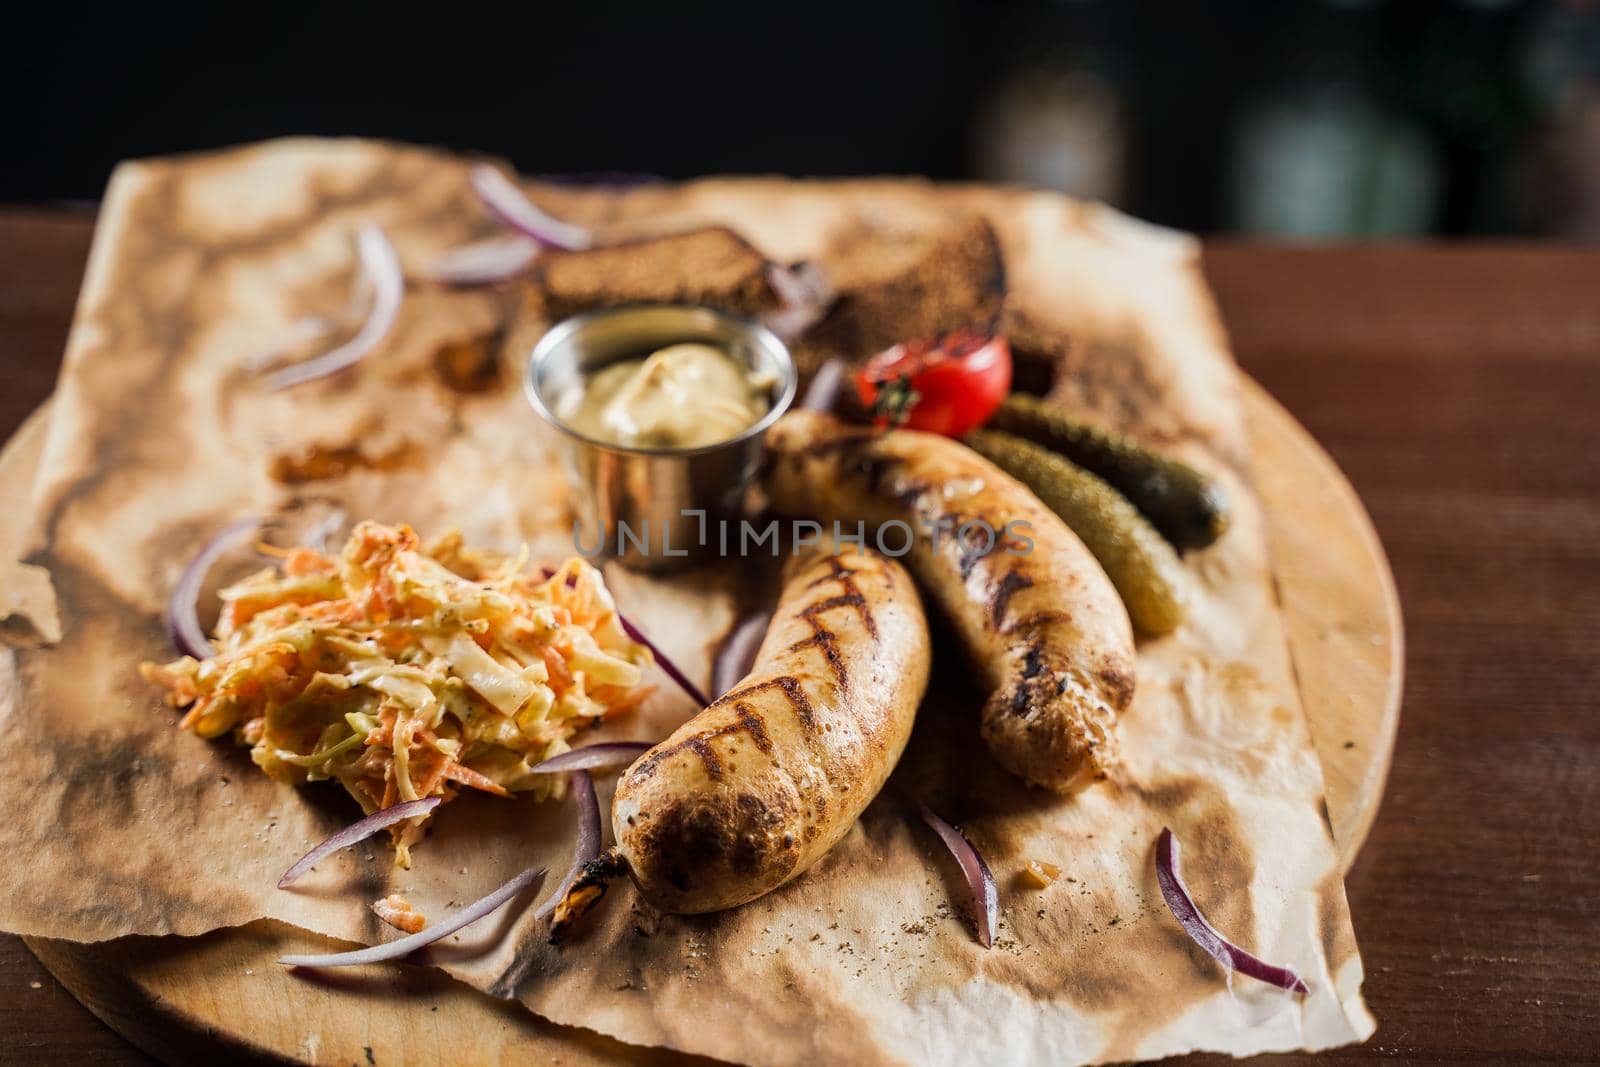 Grilled sausages with beer and vegetables with pickled cucumber, cabbage salad sauce and bread on parchment, top view.